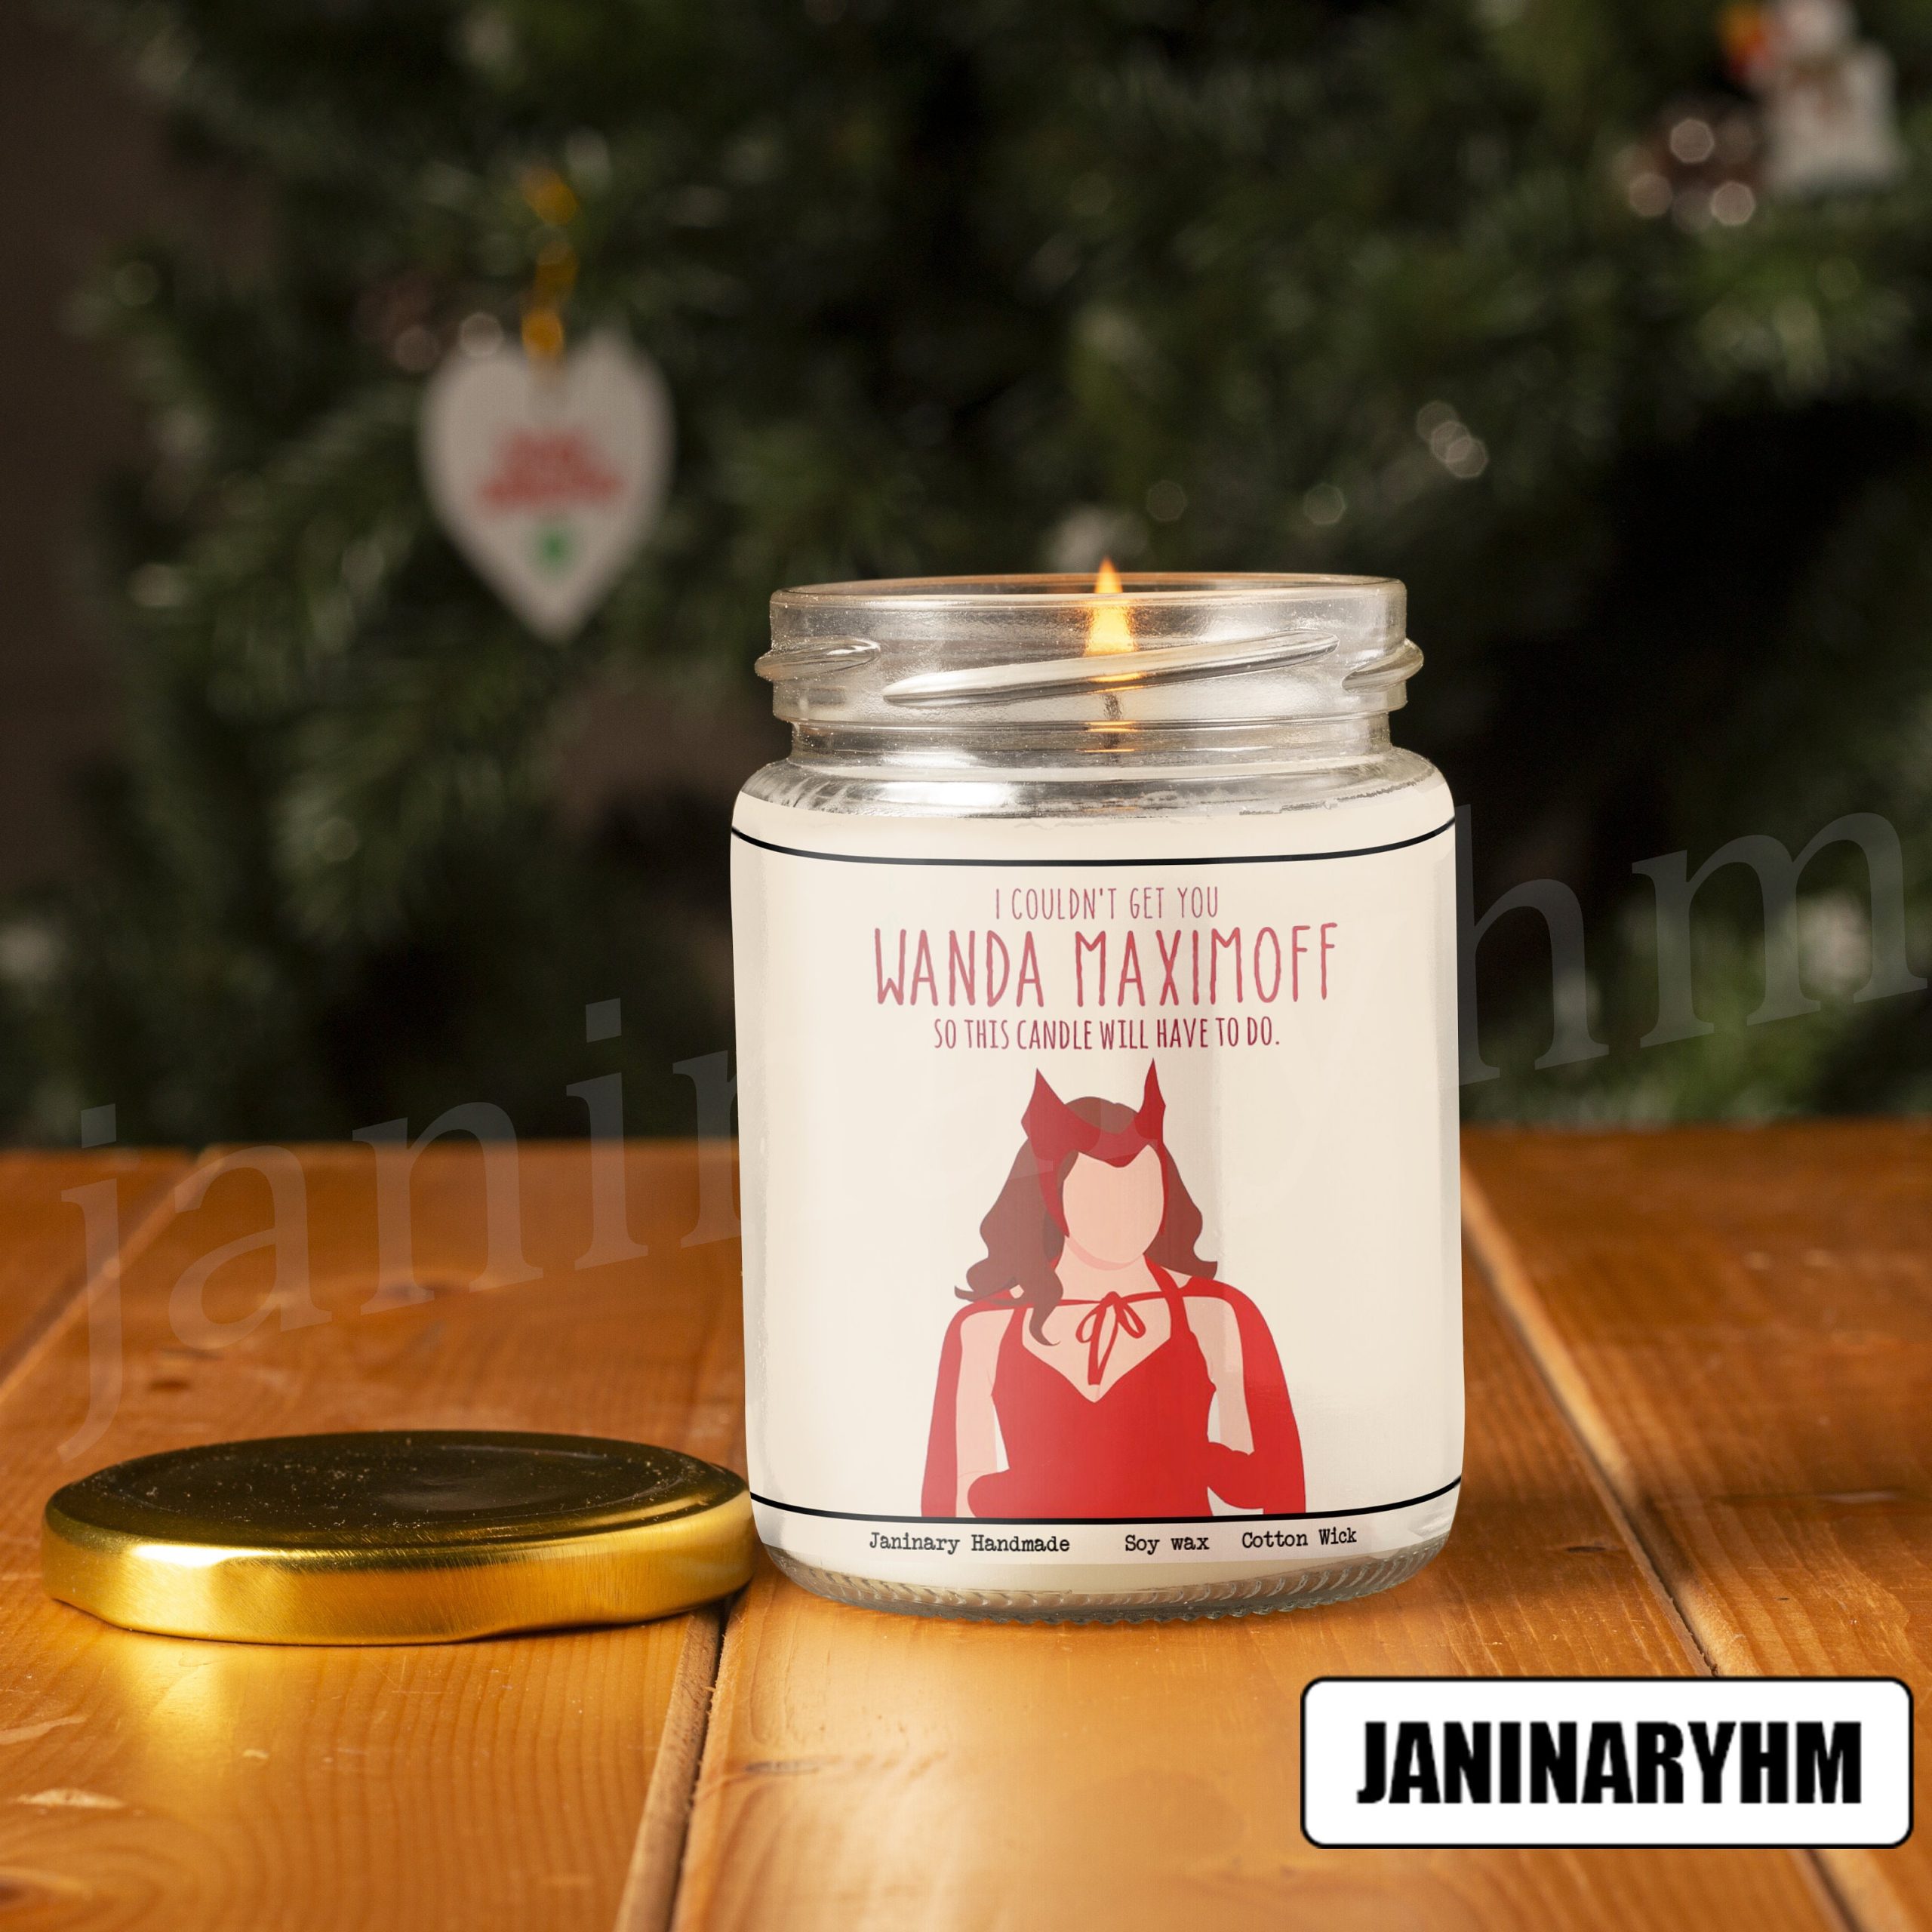 I Couldn’t Get You Wanda Maximoff Scarlet Witch Candle